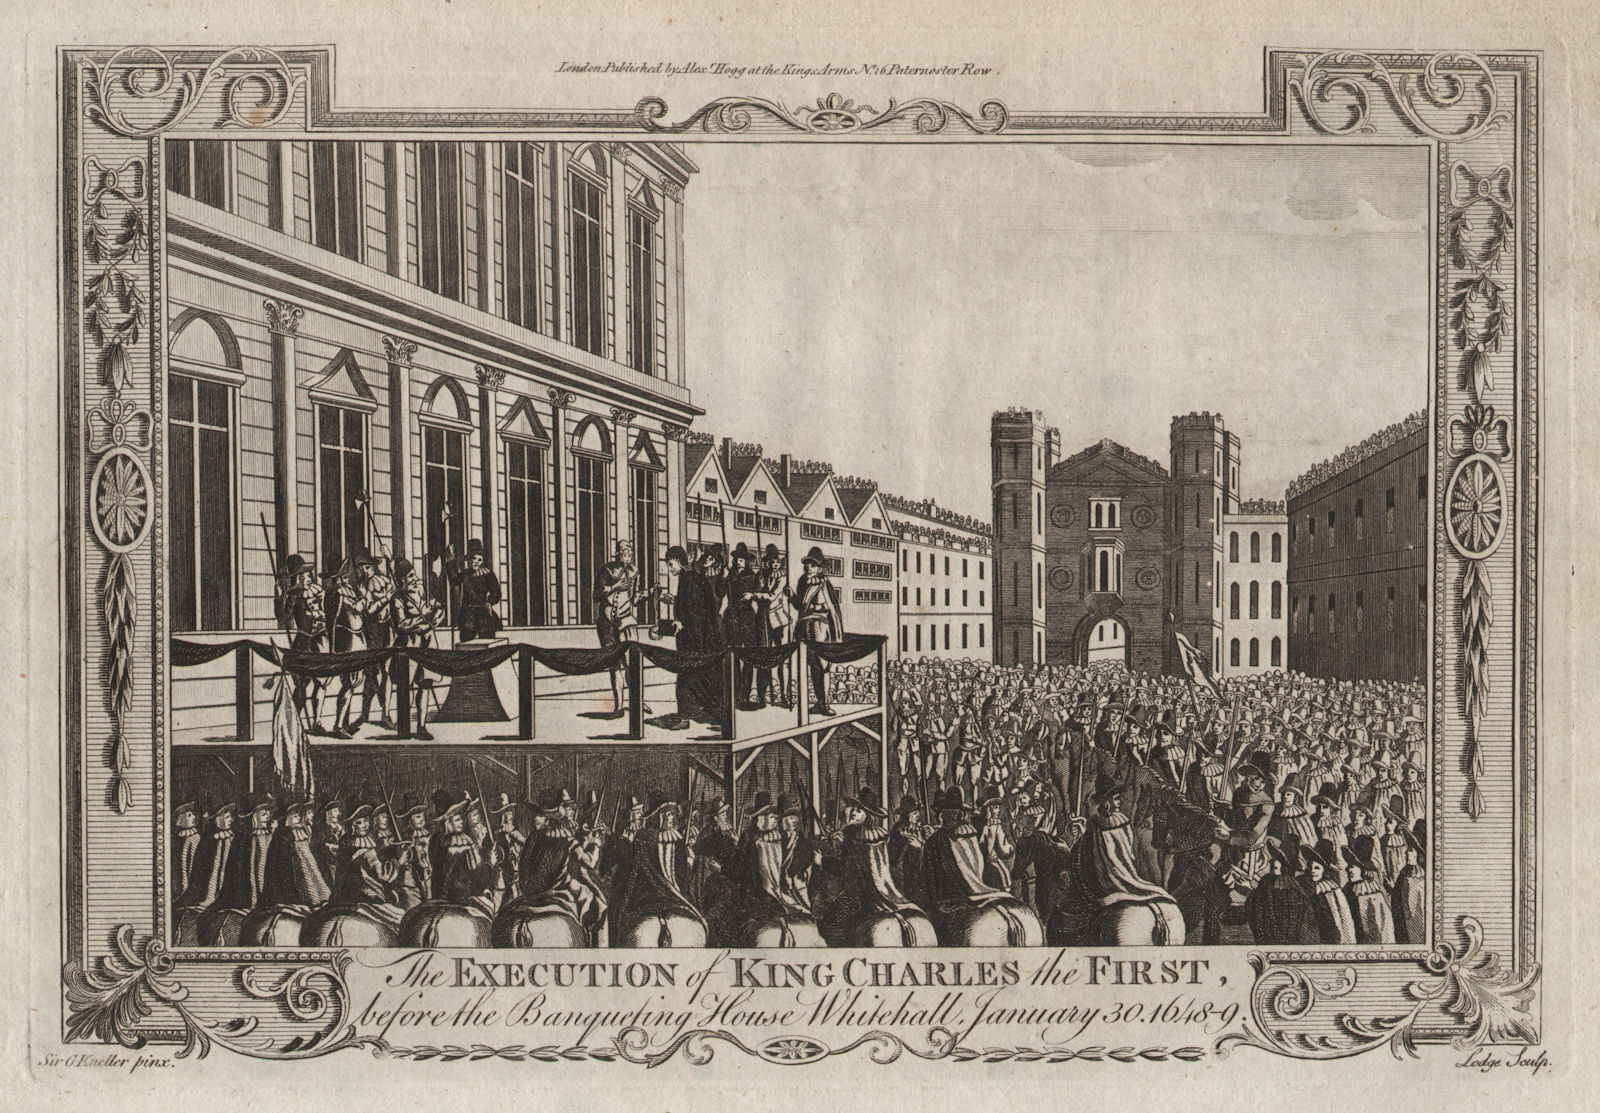 Execution of King Charles I, Banqueting House, Whitehall, 1649. THORNTON 1784